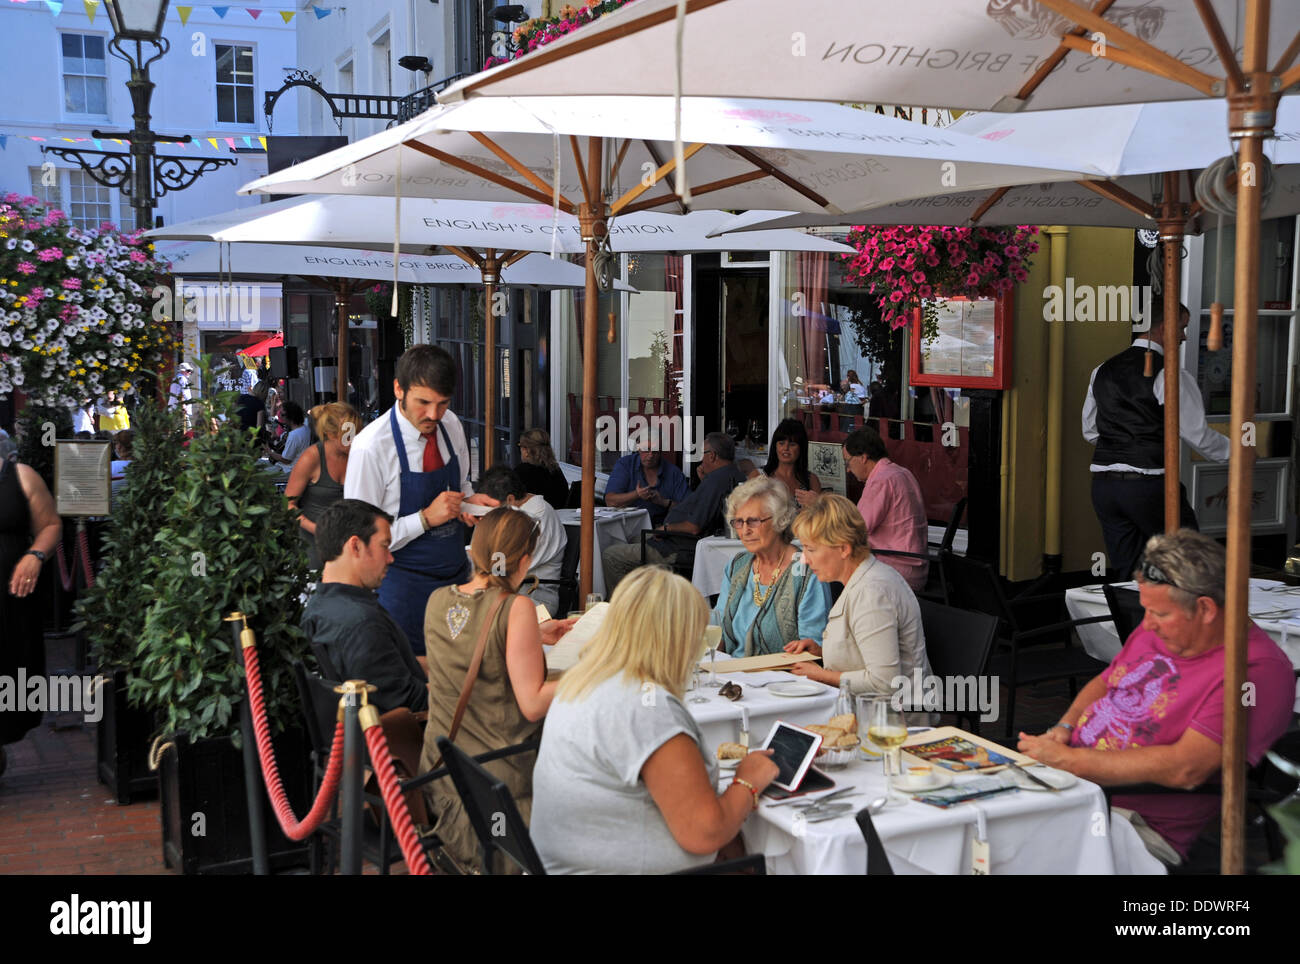 Waiter serving customers at English's seafood and oyster bar restaurant alfresco style outside in The Lanes area of Brighton UK Stock Photo